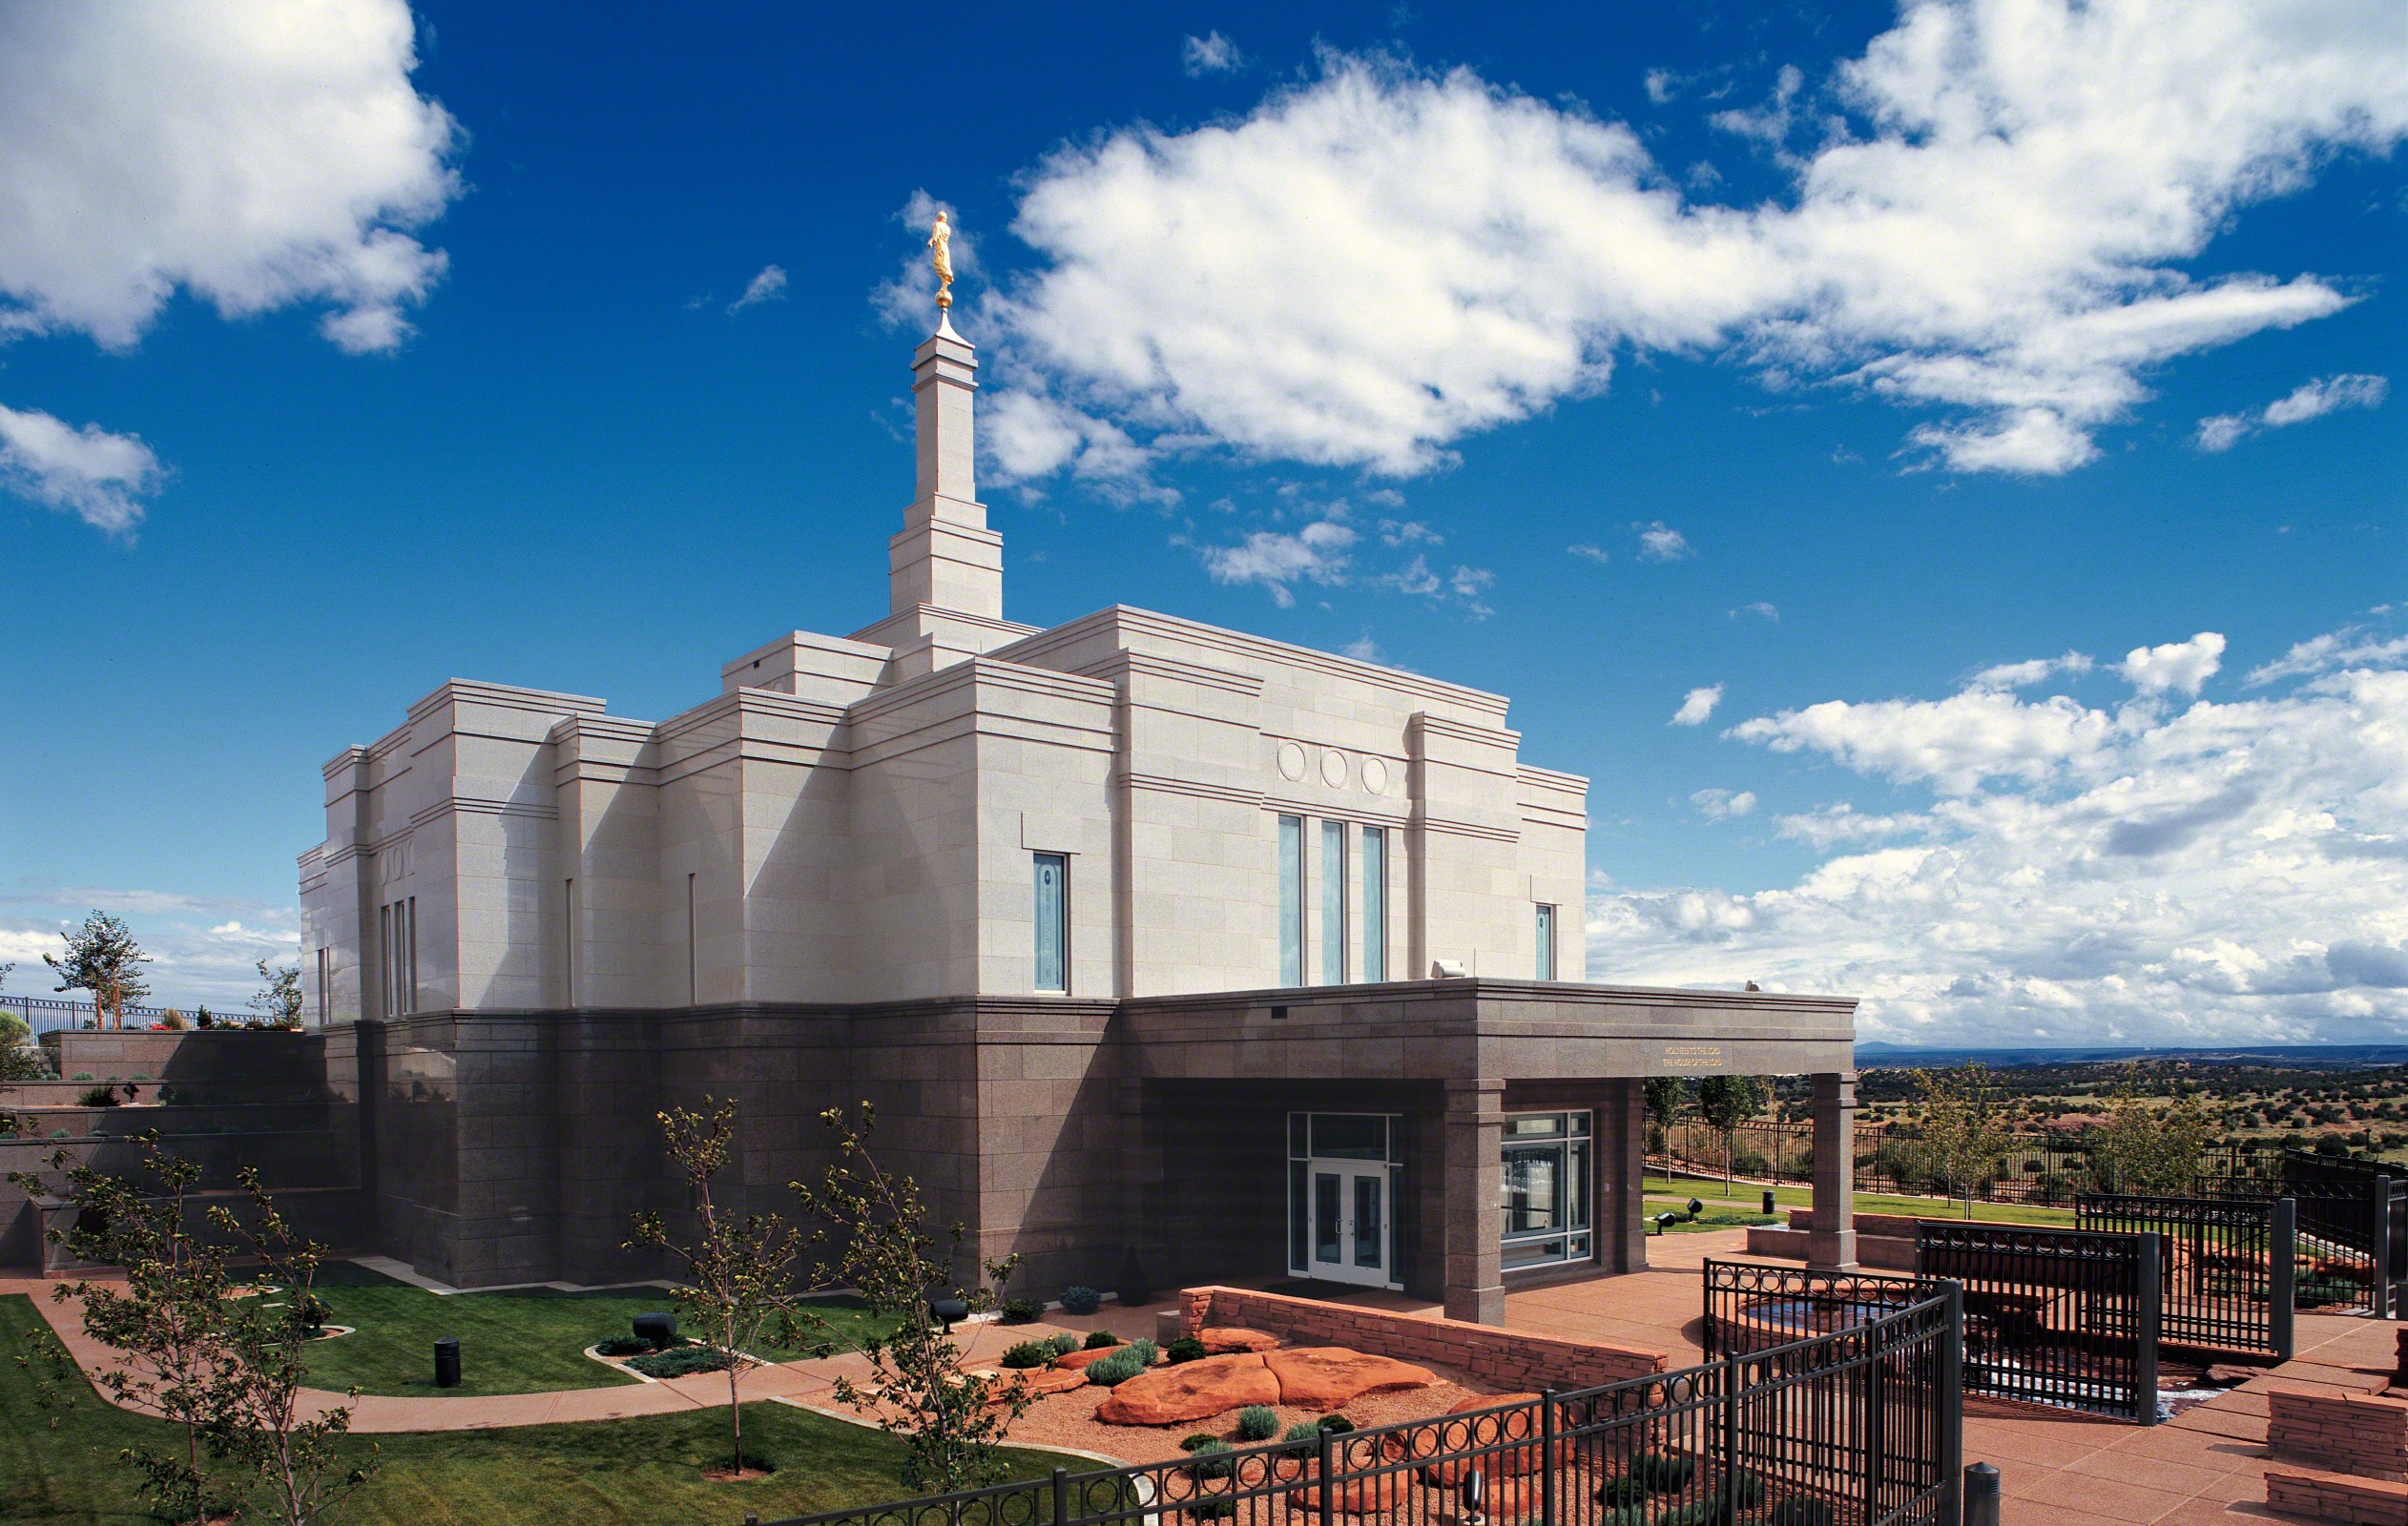 The Church of Jesus Christ of Latter-day Saints - The Dalles Oregon | 1815 E 15th St, The Dalles, OR, 97058 | +1 (541) 298-8688